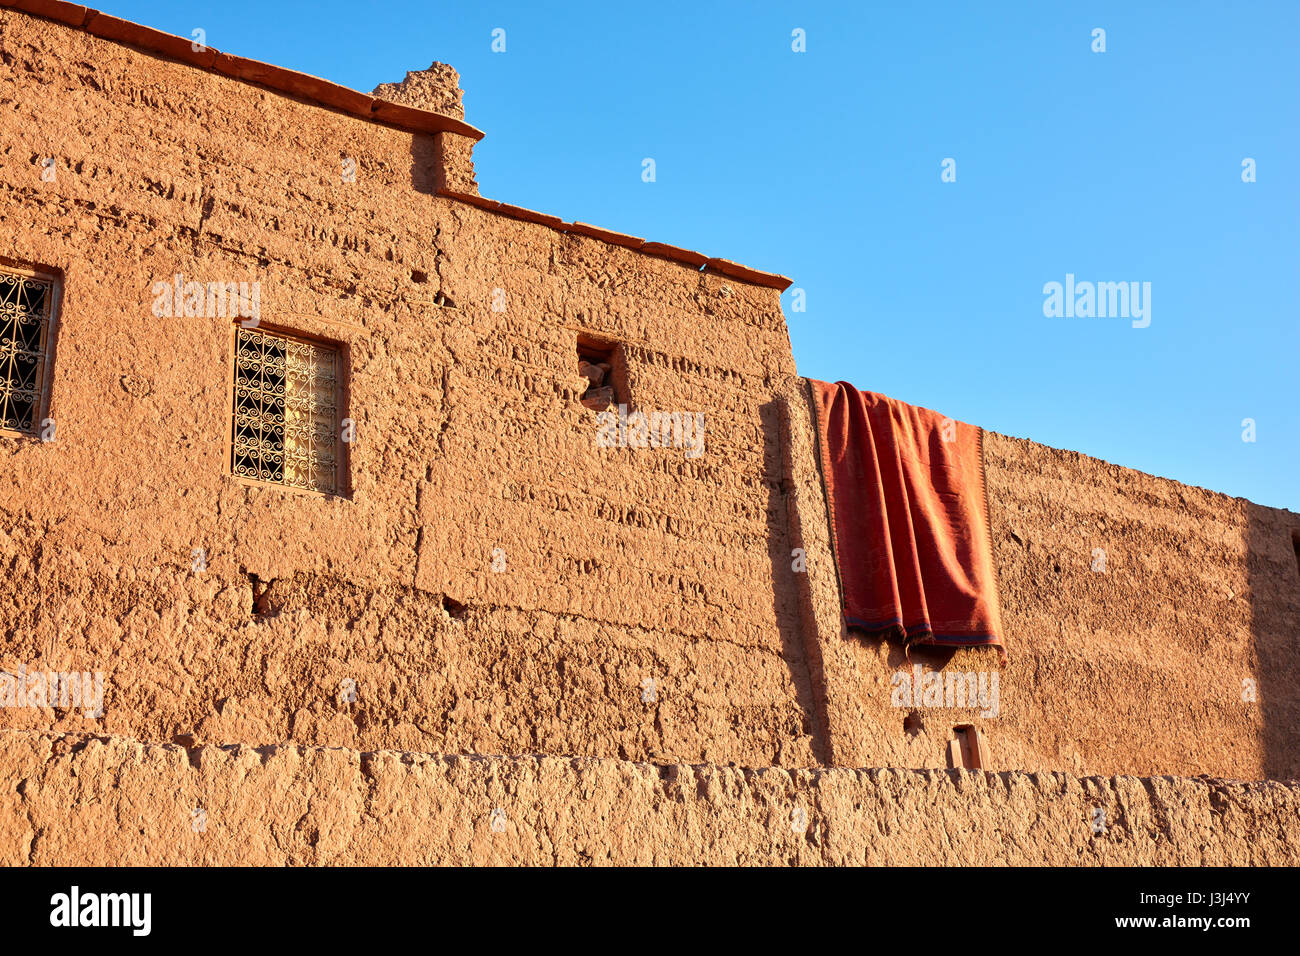 Drying carpet on the earthen walls of the house, Morocco Stock Photo